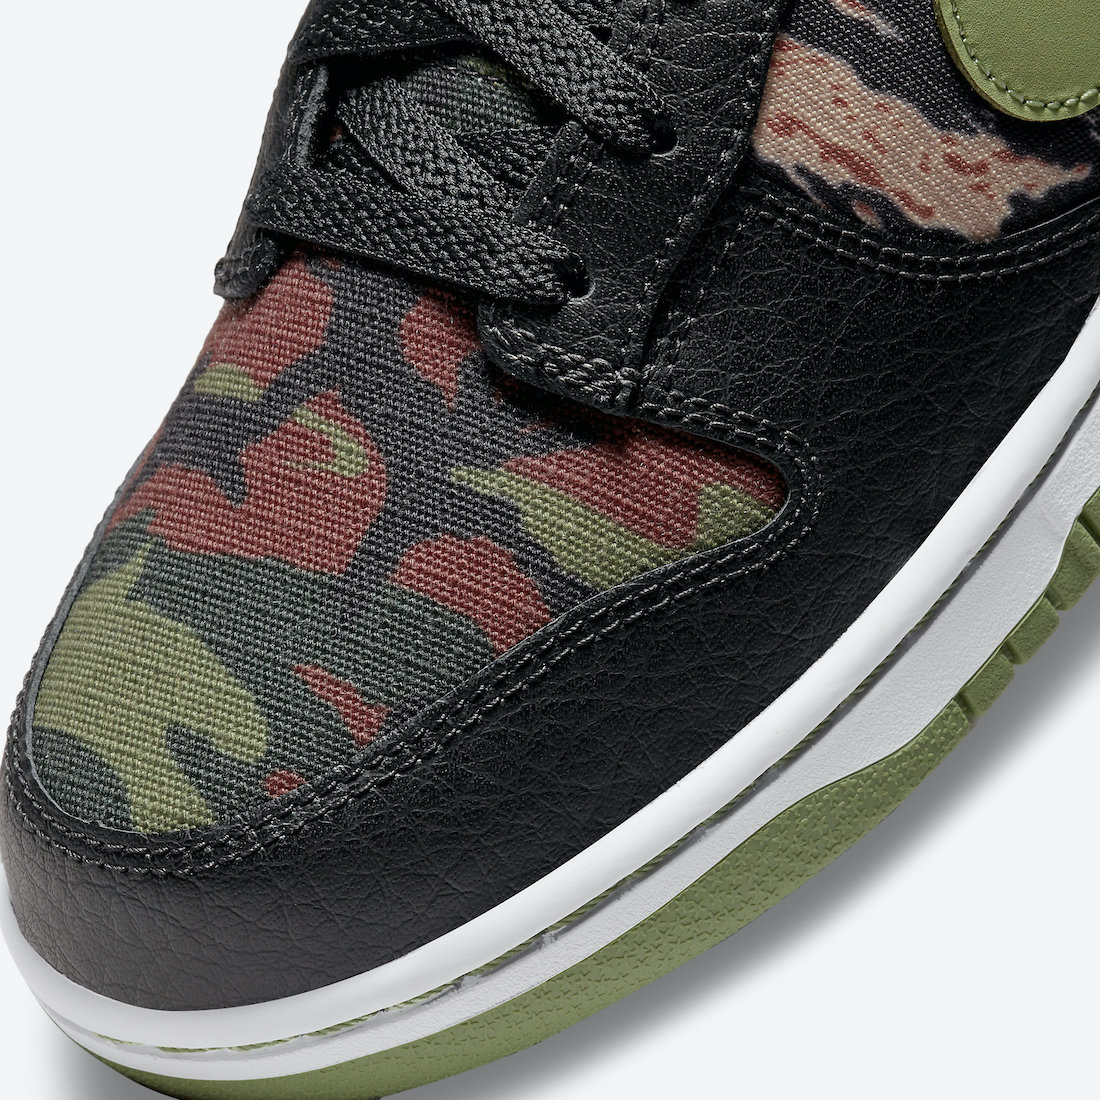 Nike SB Dunk Low Crazy Camo DH0957-001 Release Date